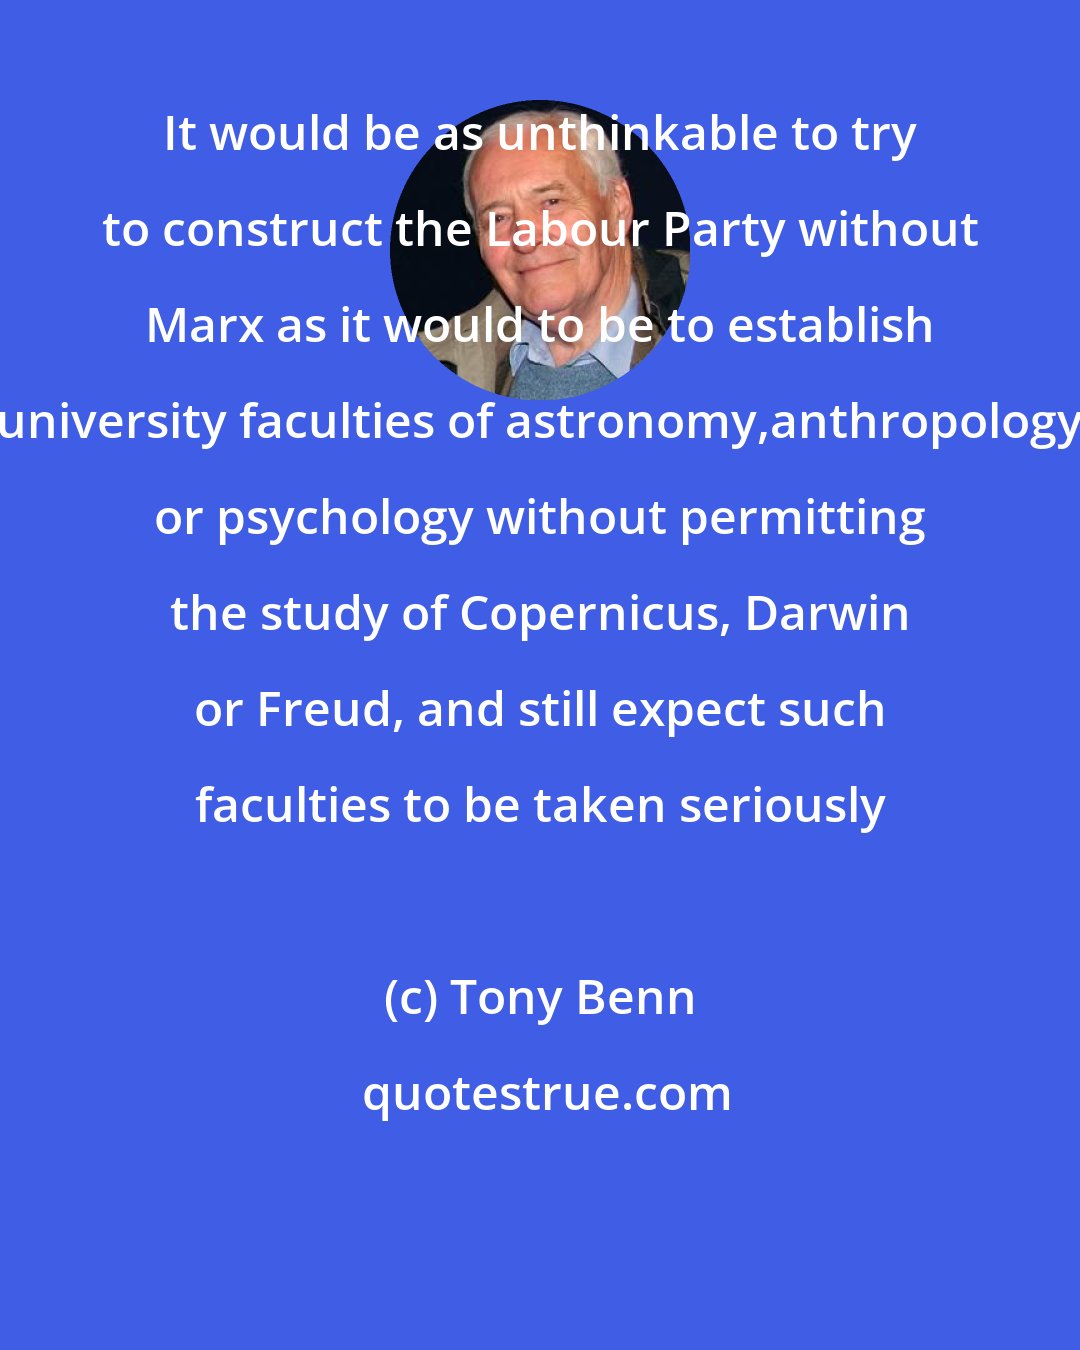 Tony Benn: It would be as unthinkable to try to construct the Labour Party without Marx as it would to be to establish university faculties of astronomy,anthropology or psychology without permitting the study of Copernicus, Darwin or Freud, and still expect such faculties to be taken seriously